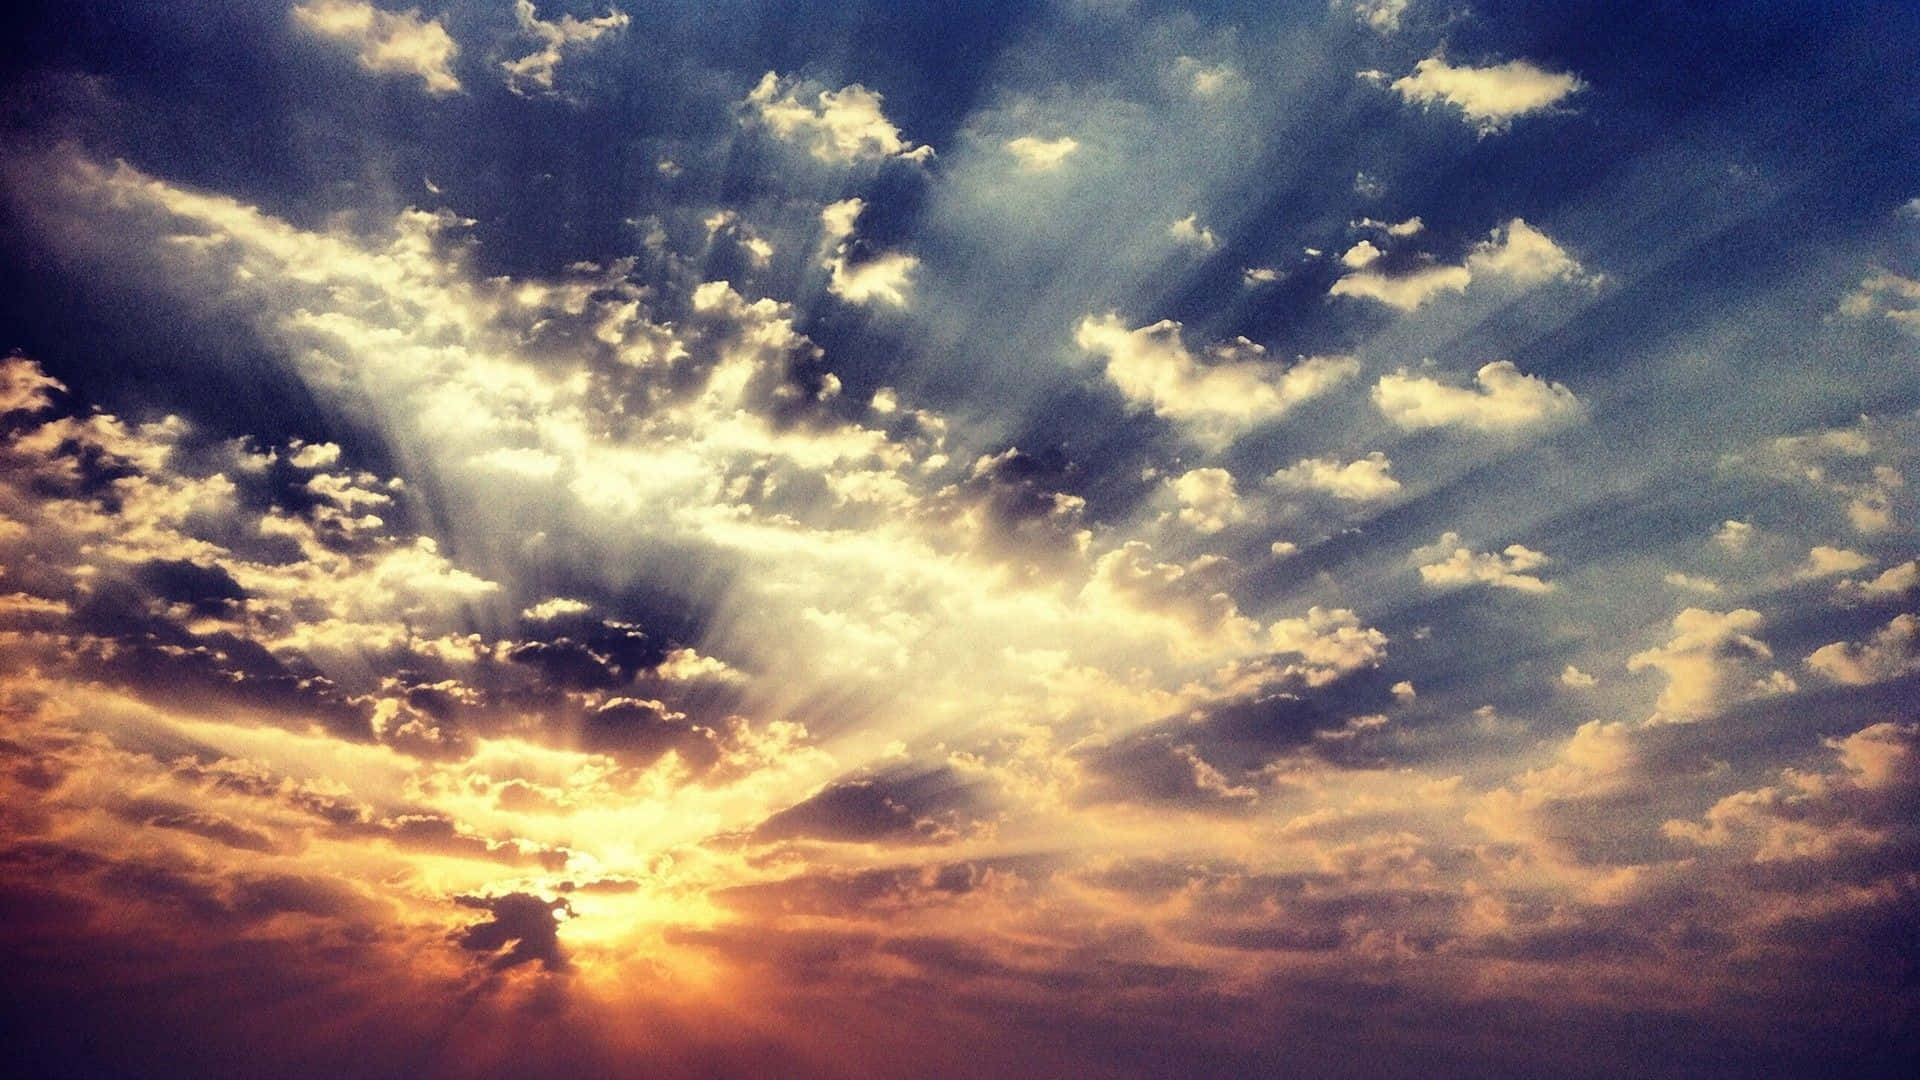 HD Background Of Sunset Sky With Clouds Wallpaper